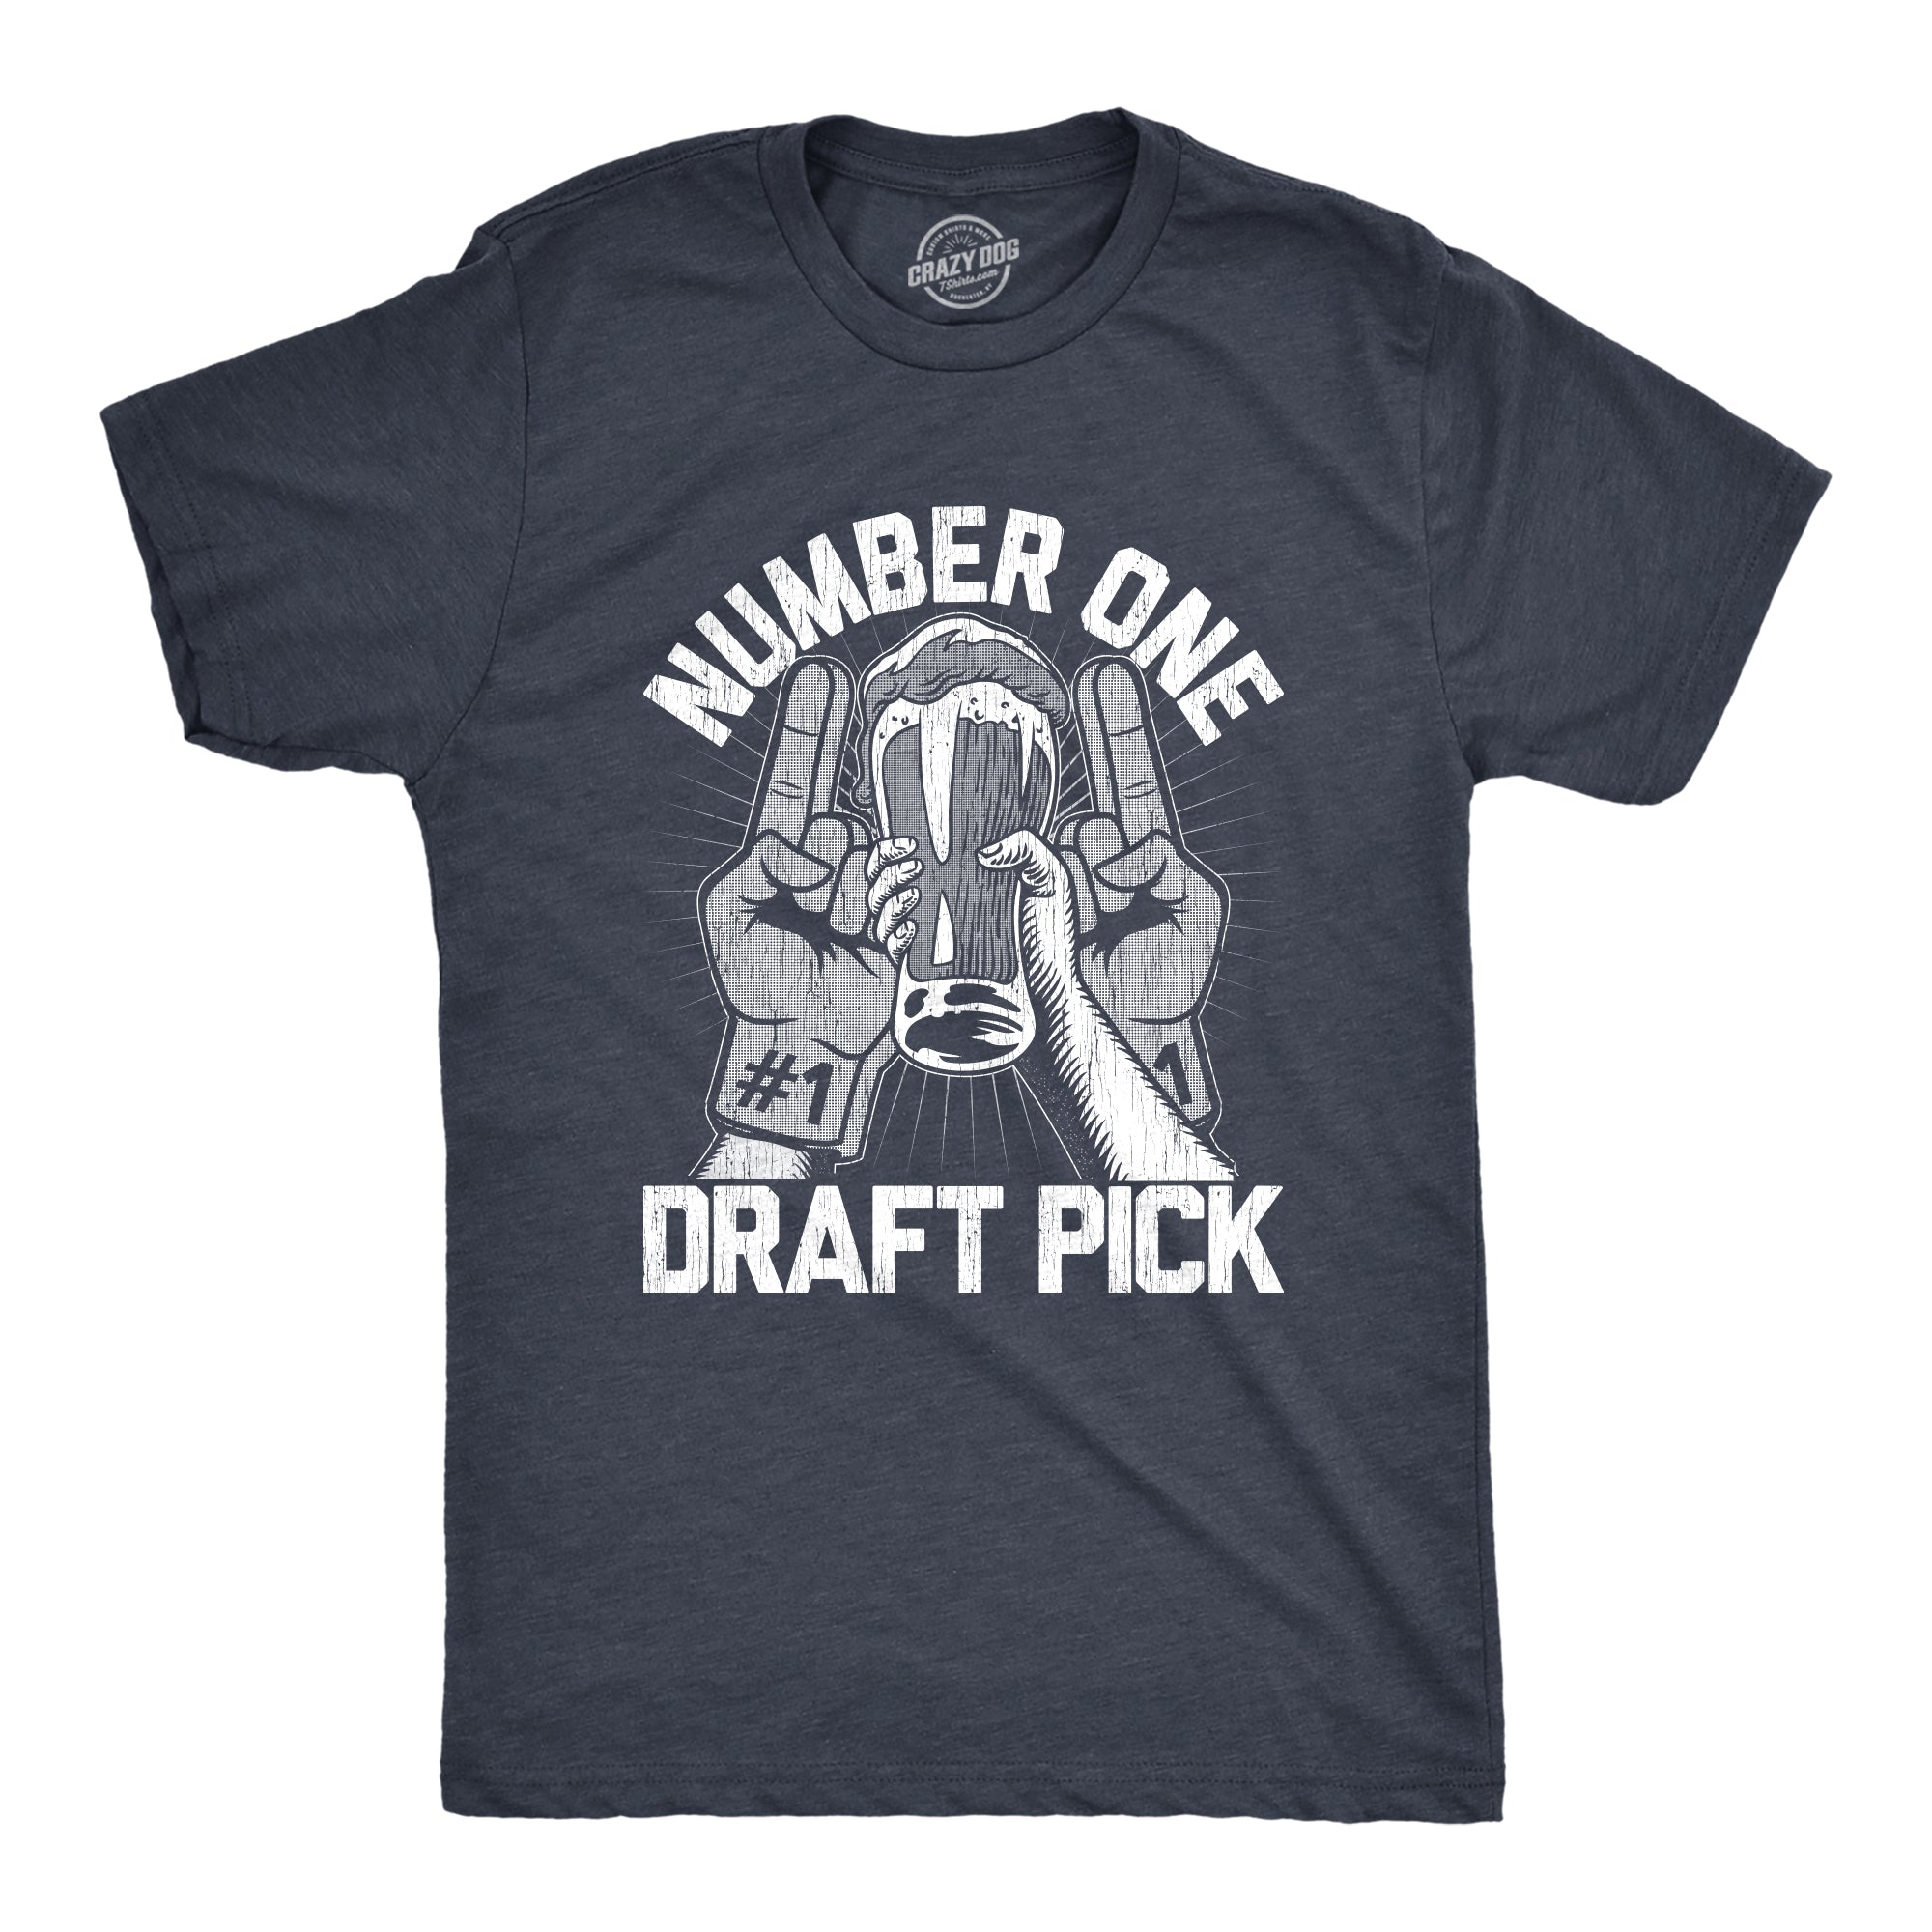 Funny Heather Navy - DRAFT Number One Draft Pick Mens T Shirt Nerdy Football Beer Drinking Tee